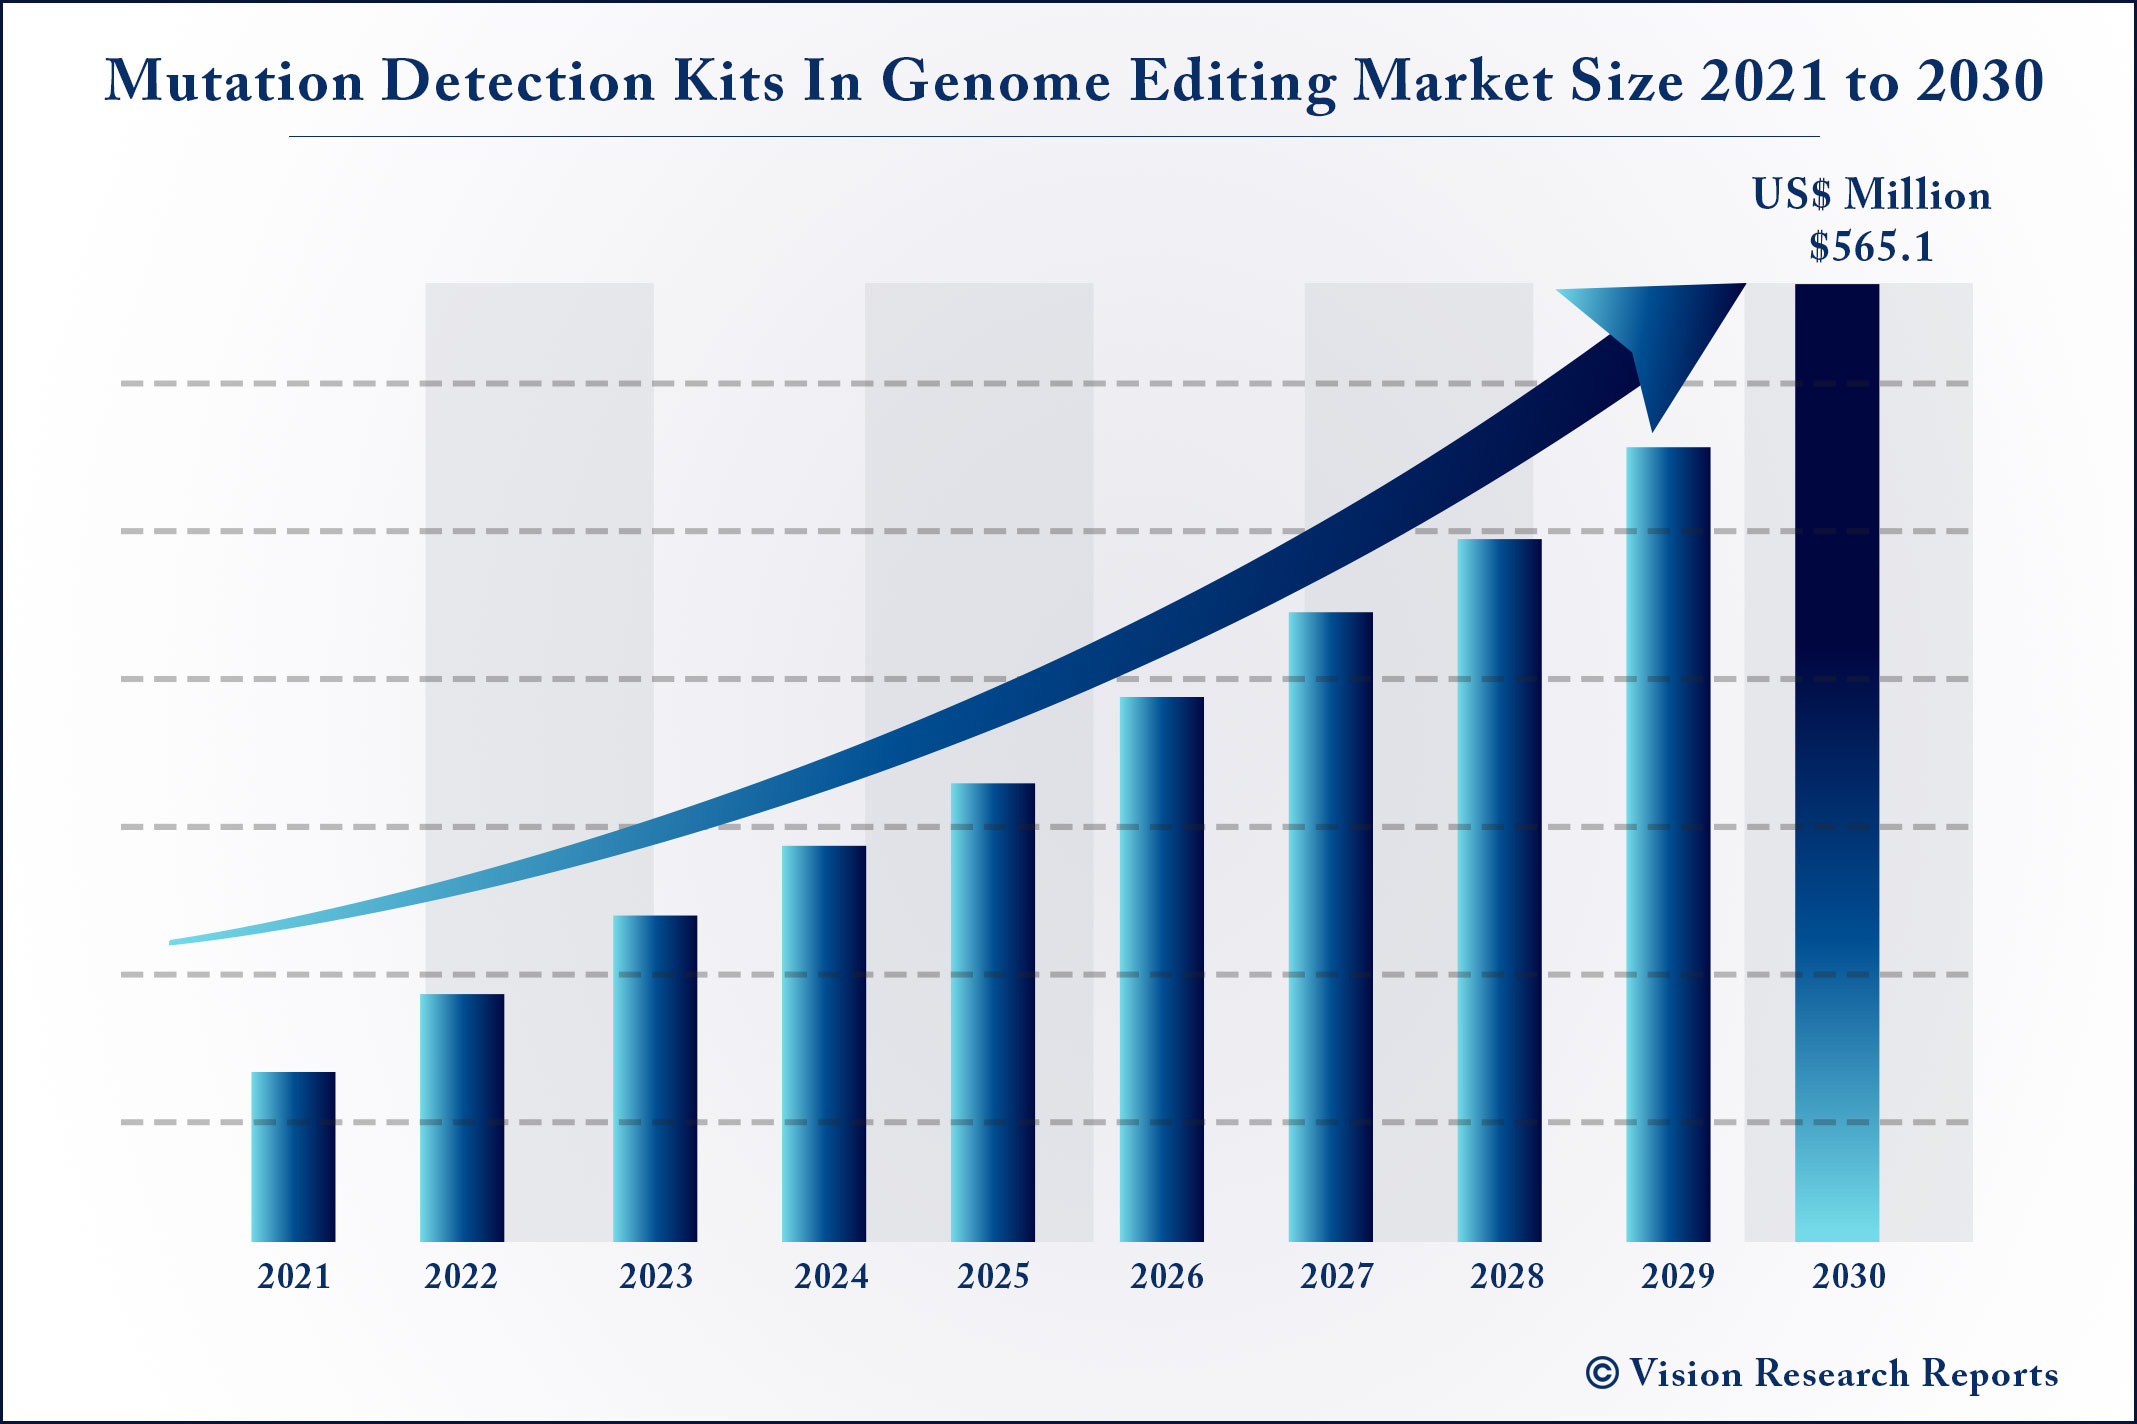 Mutation Detection Kits In Genome Editing Market Size 2021 to 2030